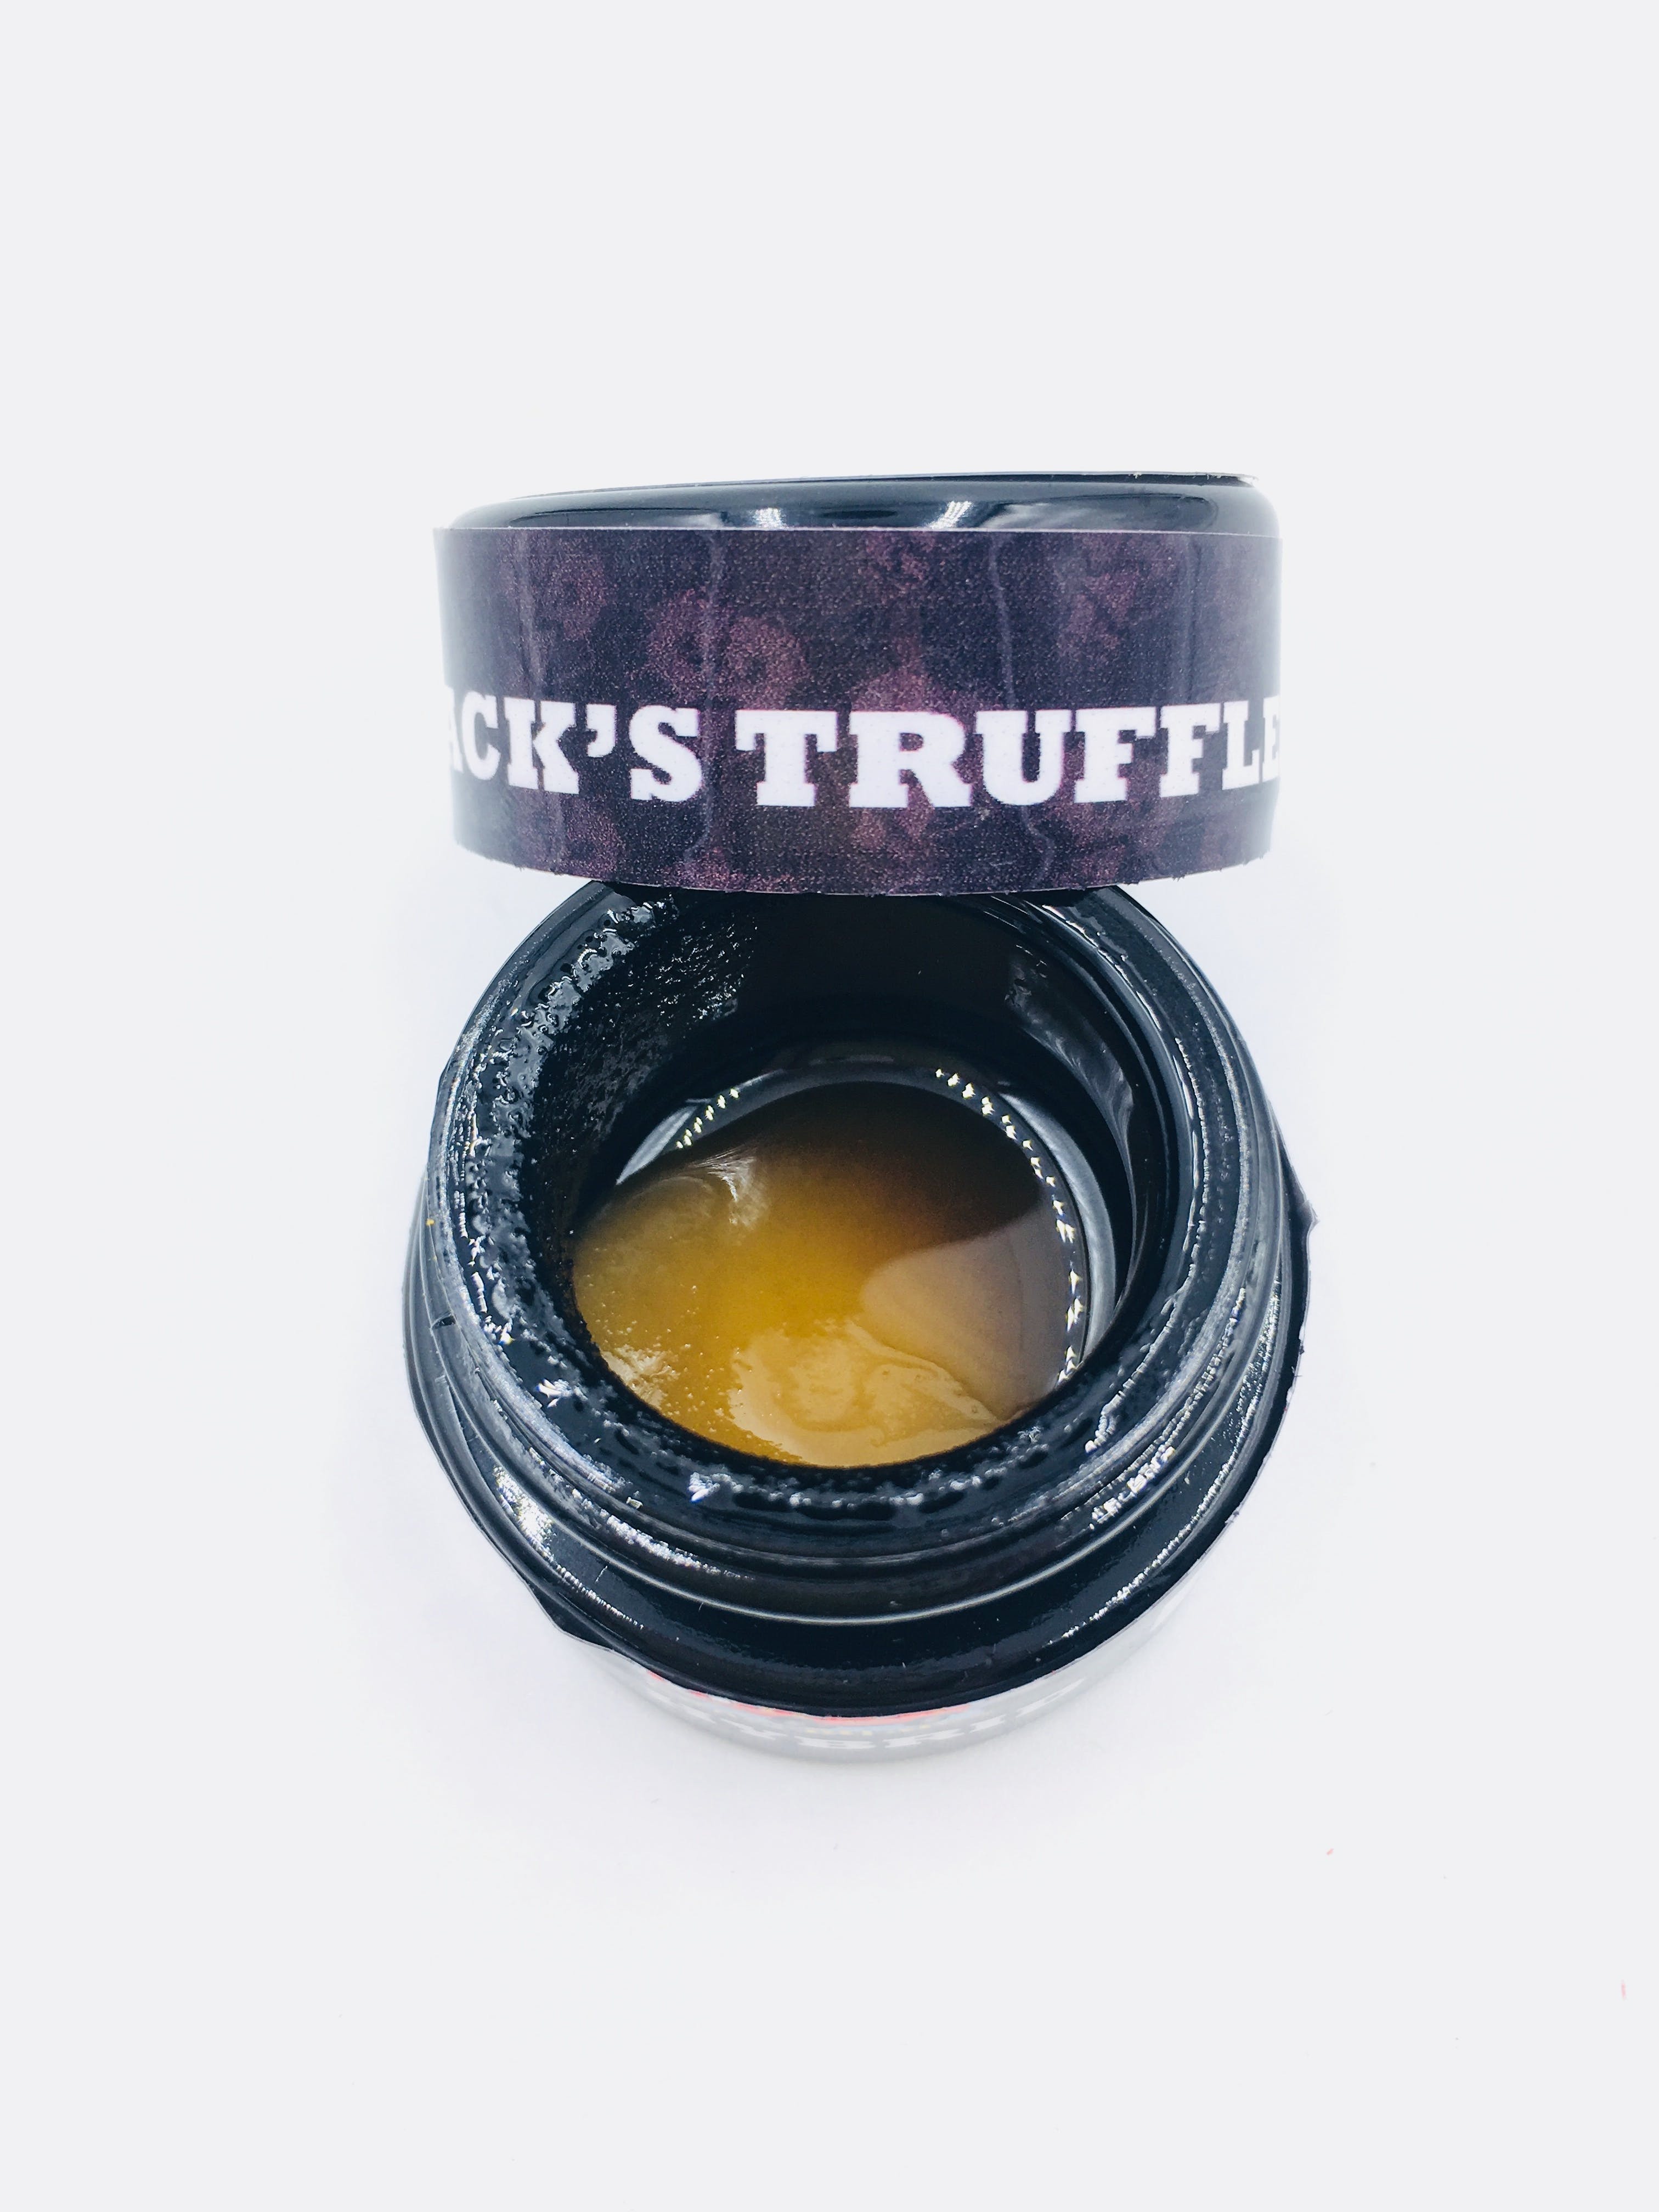 wax-travelling-high-concentrates-badder-jacks-truffle